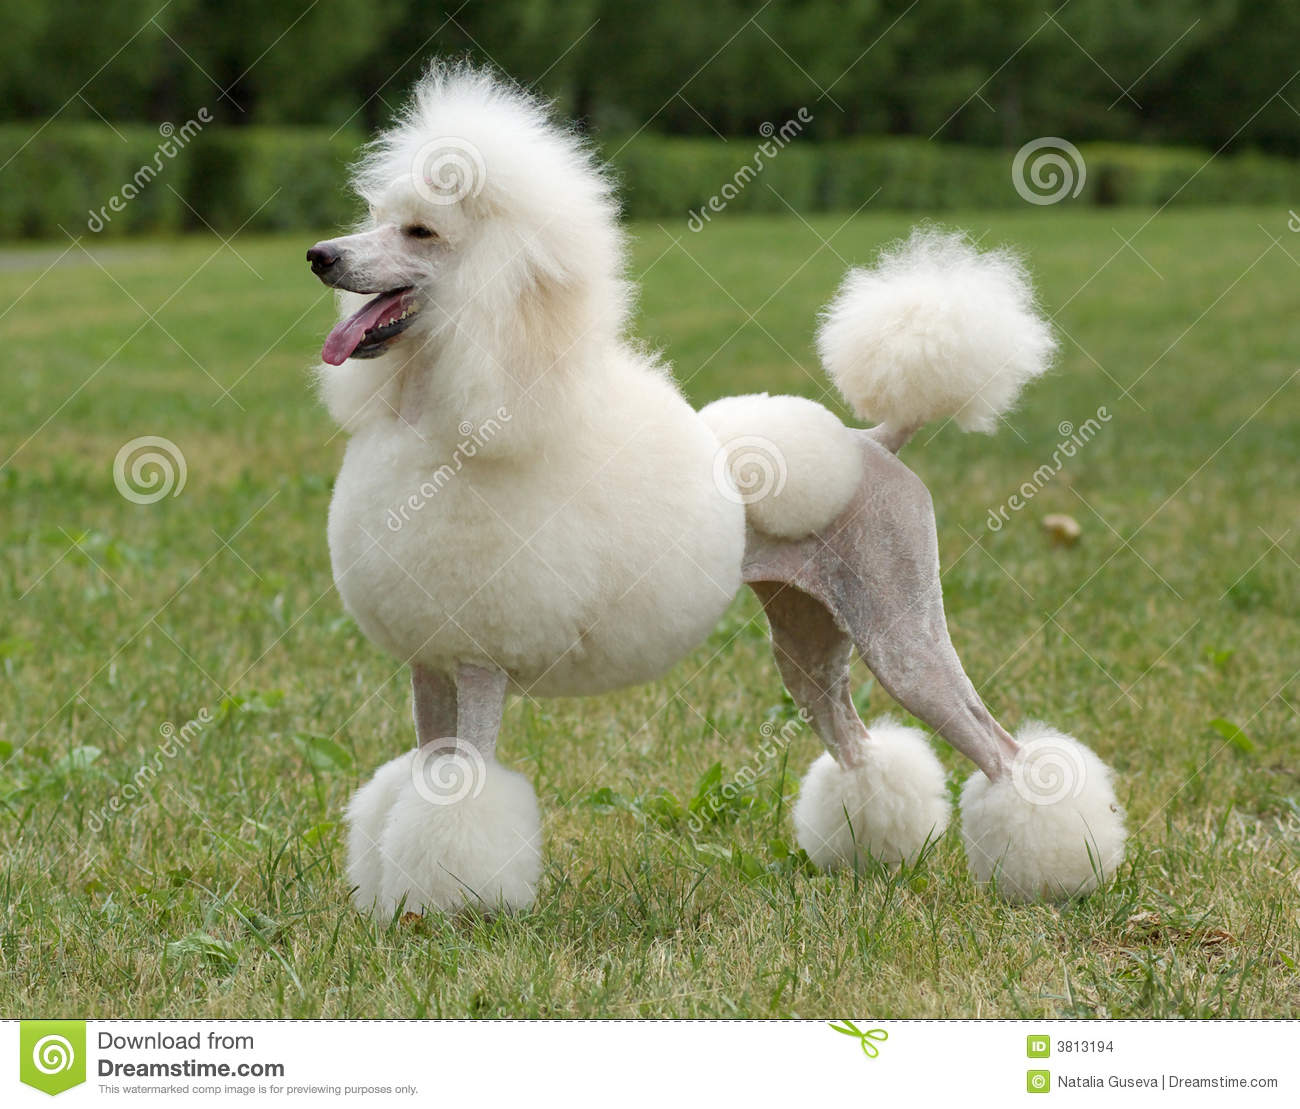 White Cropped Poodle Dog In Lawn